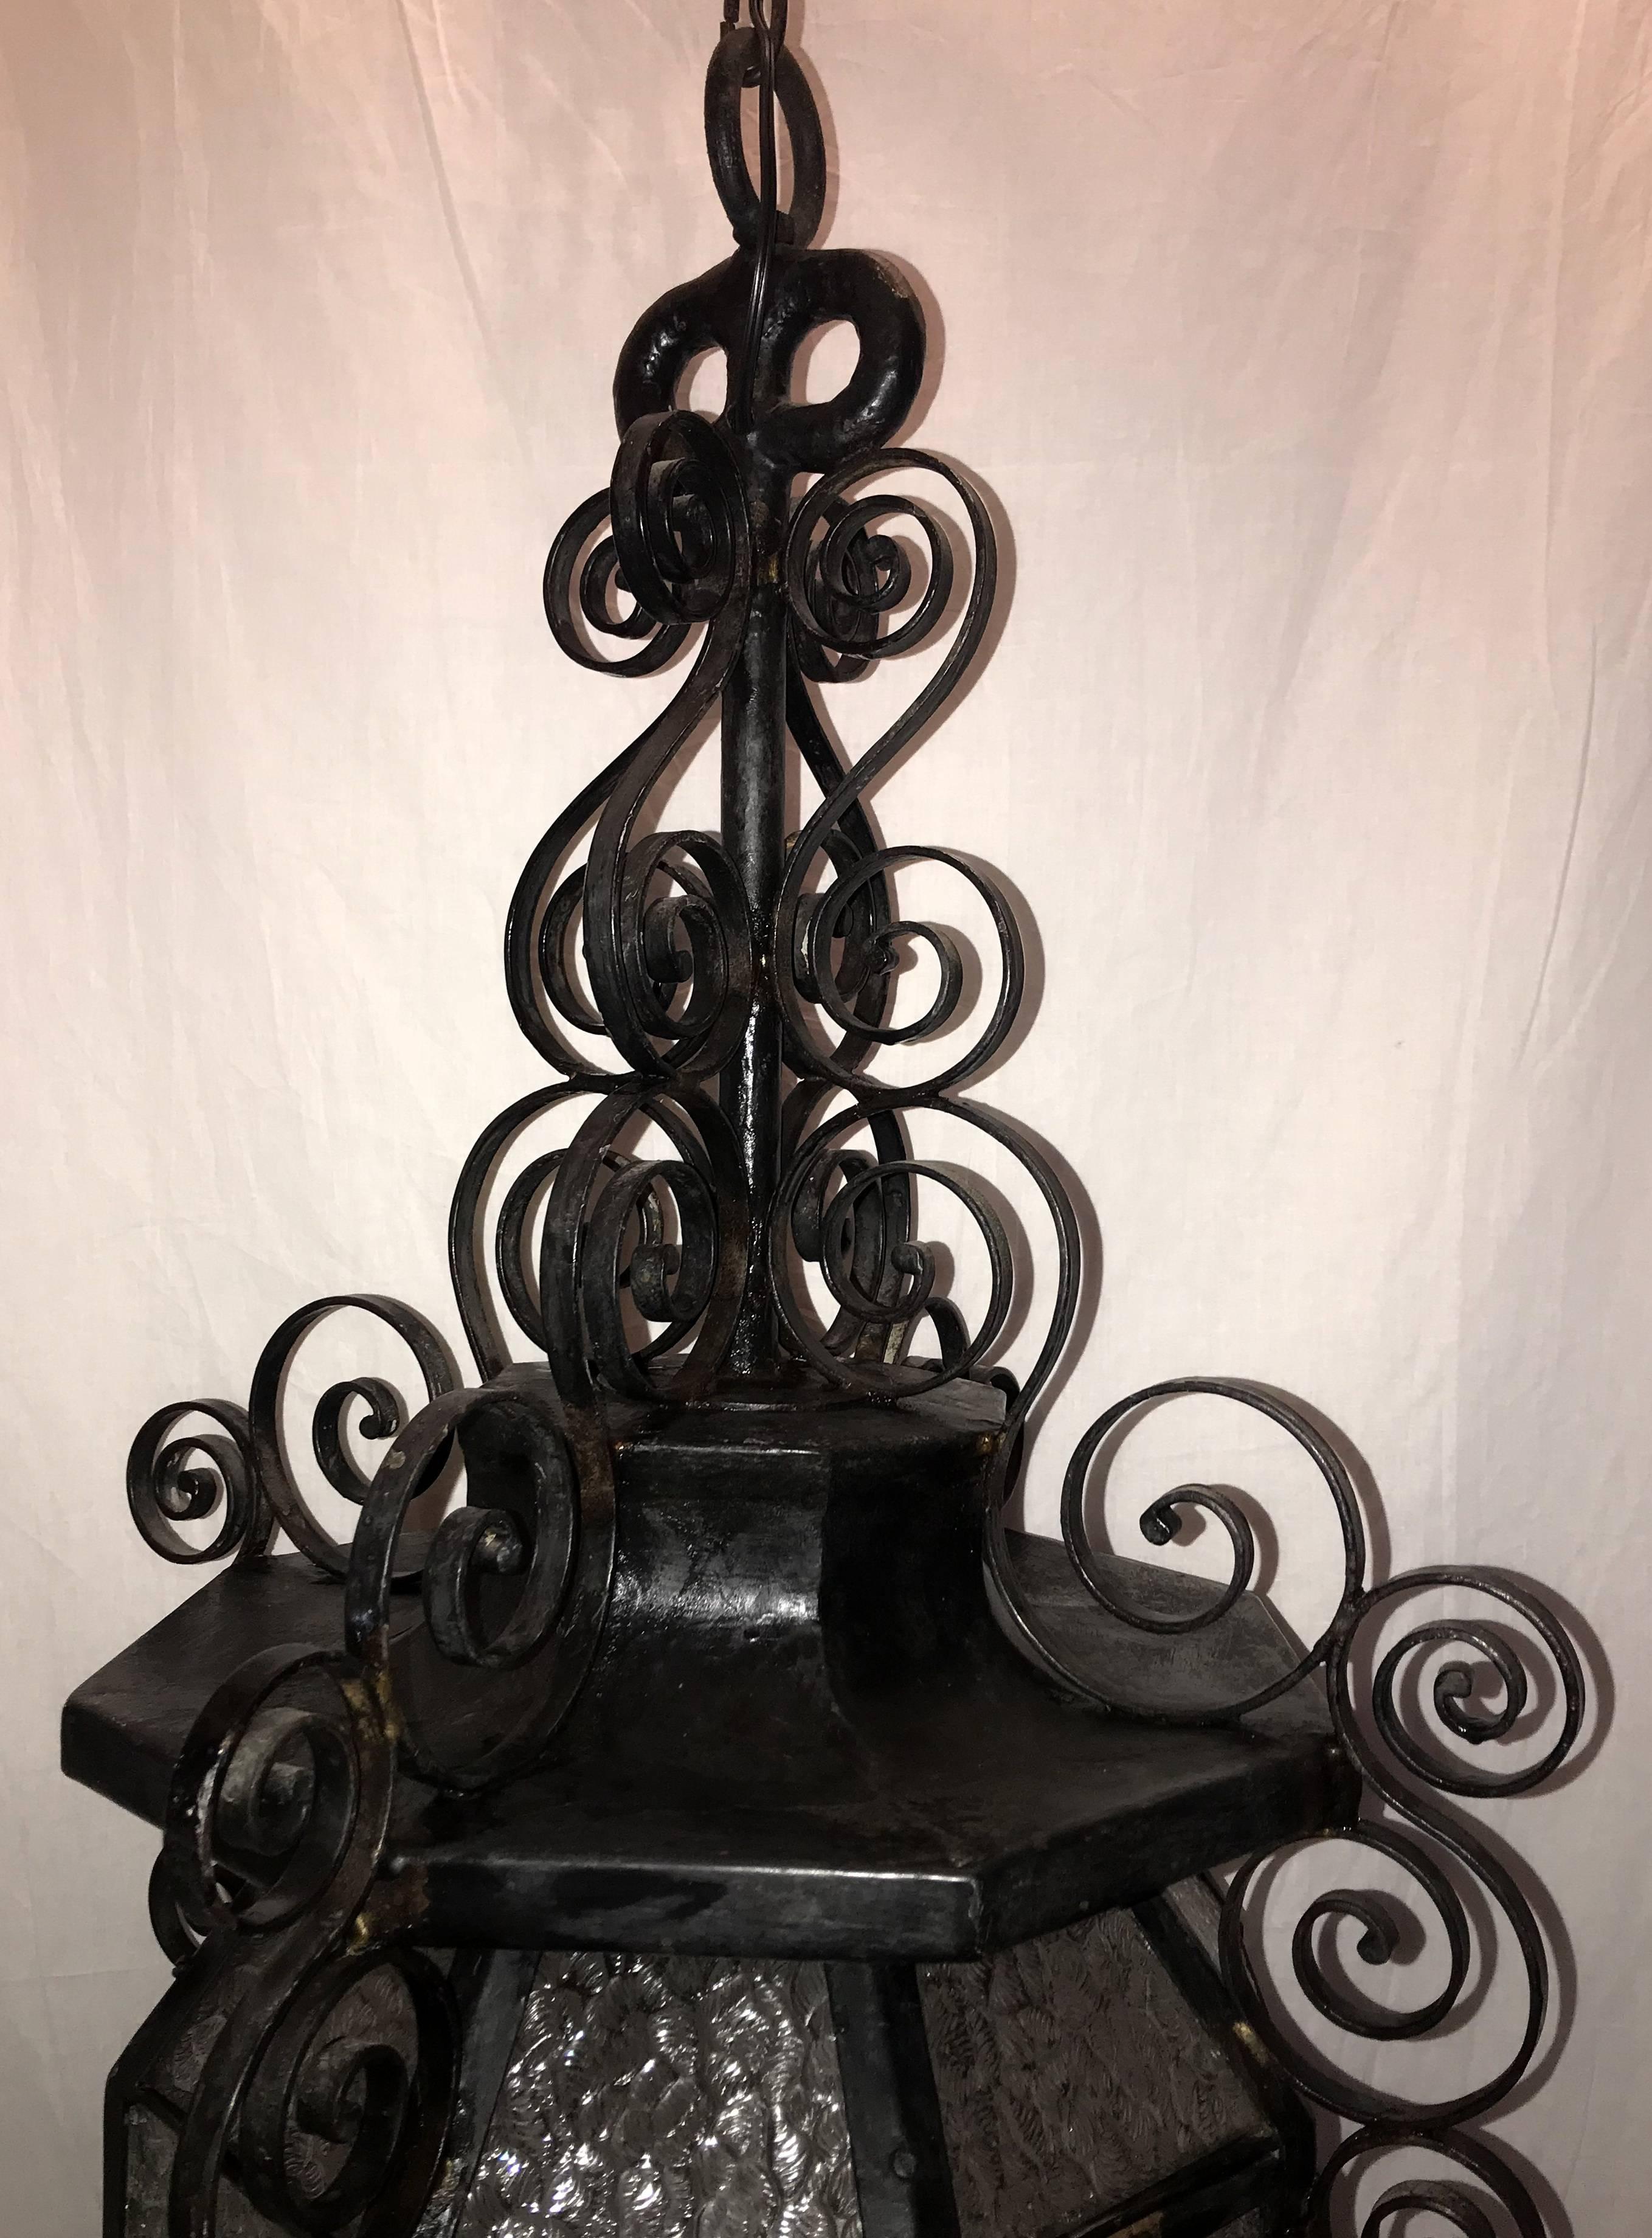 A wonderful pair of French iron scroll fixtures in the Art Nouveau motif, with glass panels set into each pagoda lantern form each with three candelabra lights.

Each sold individually.